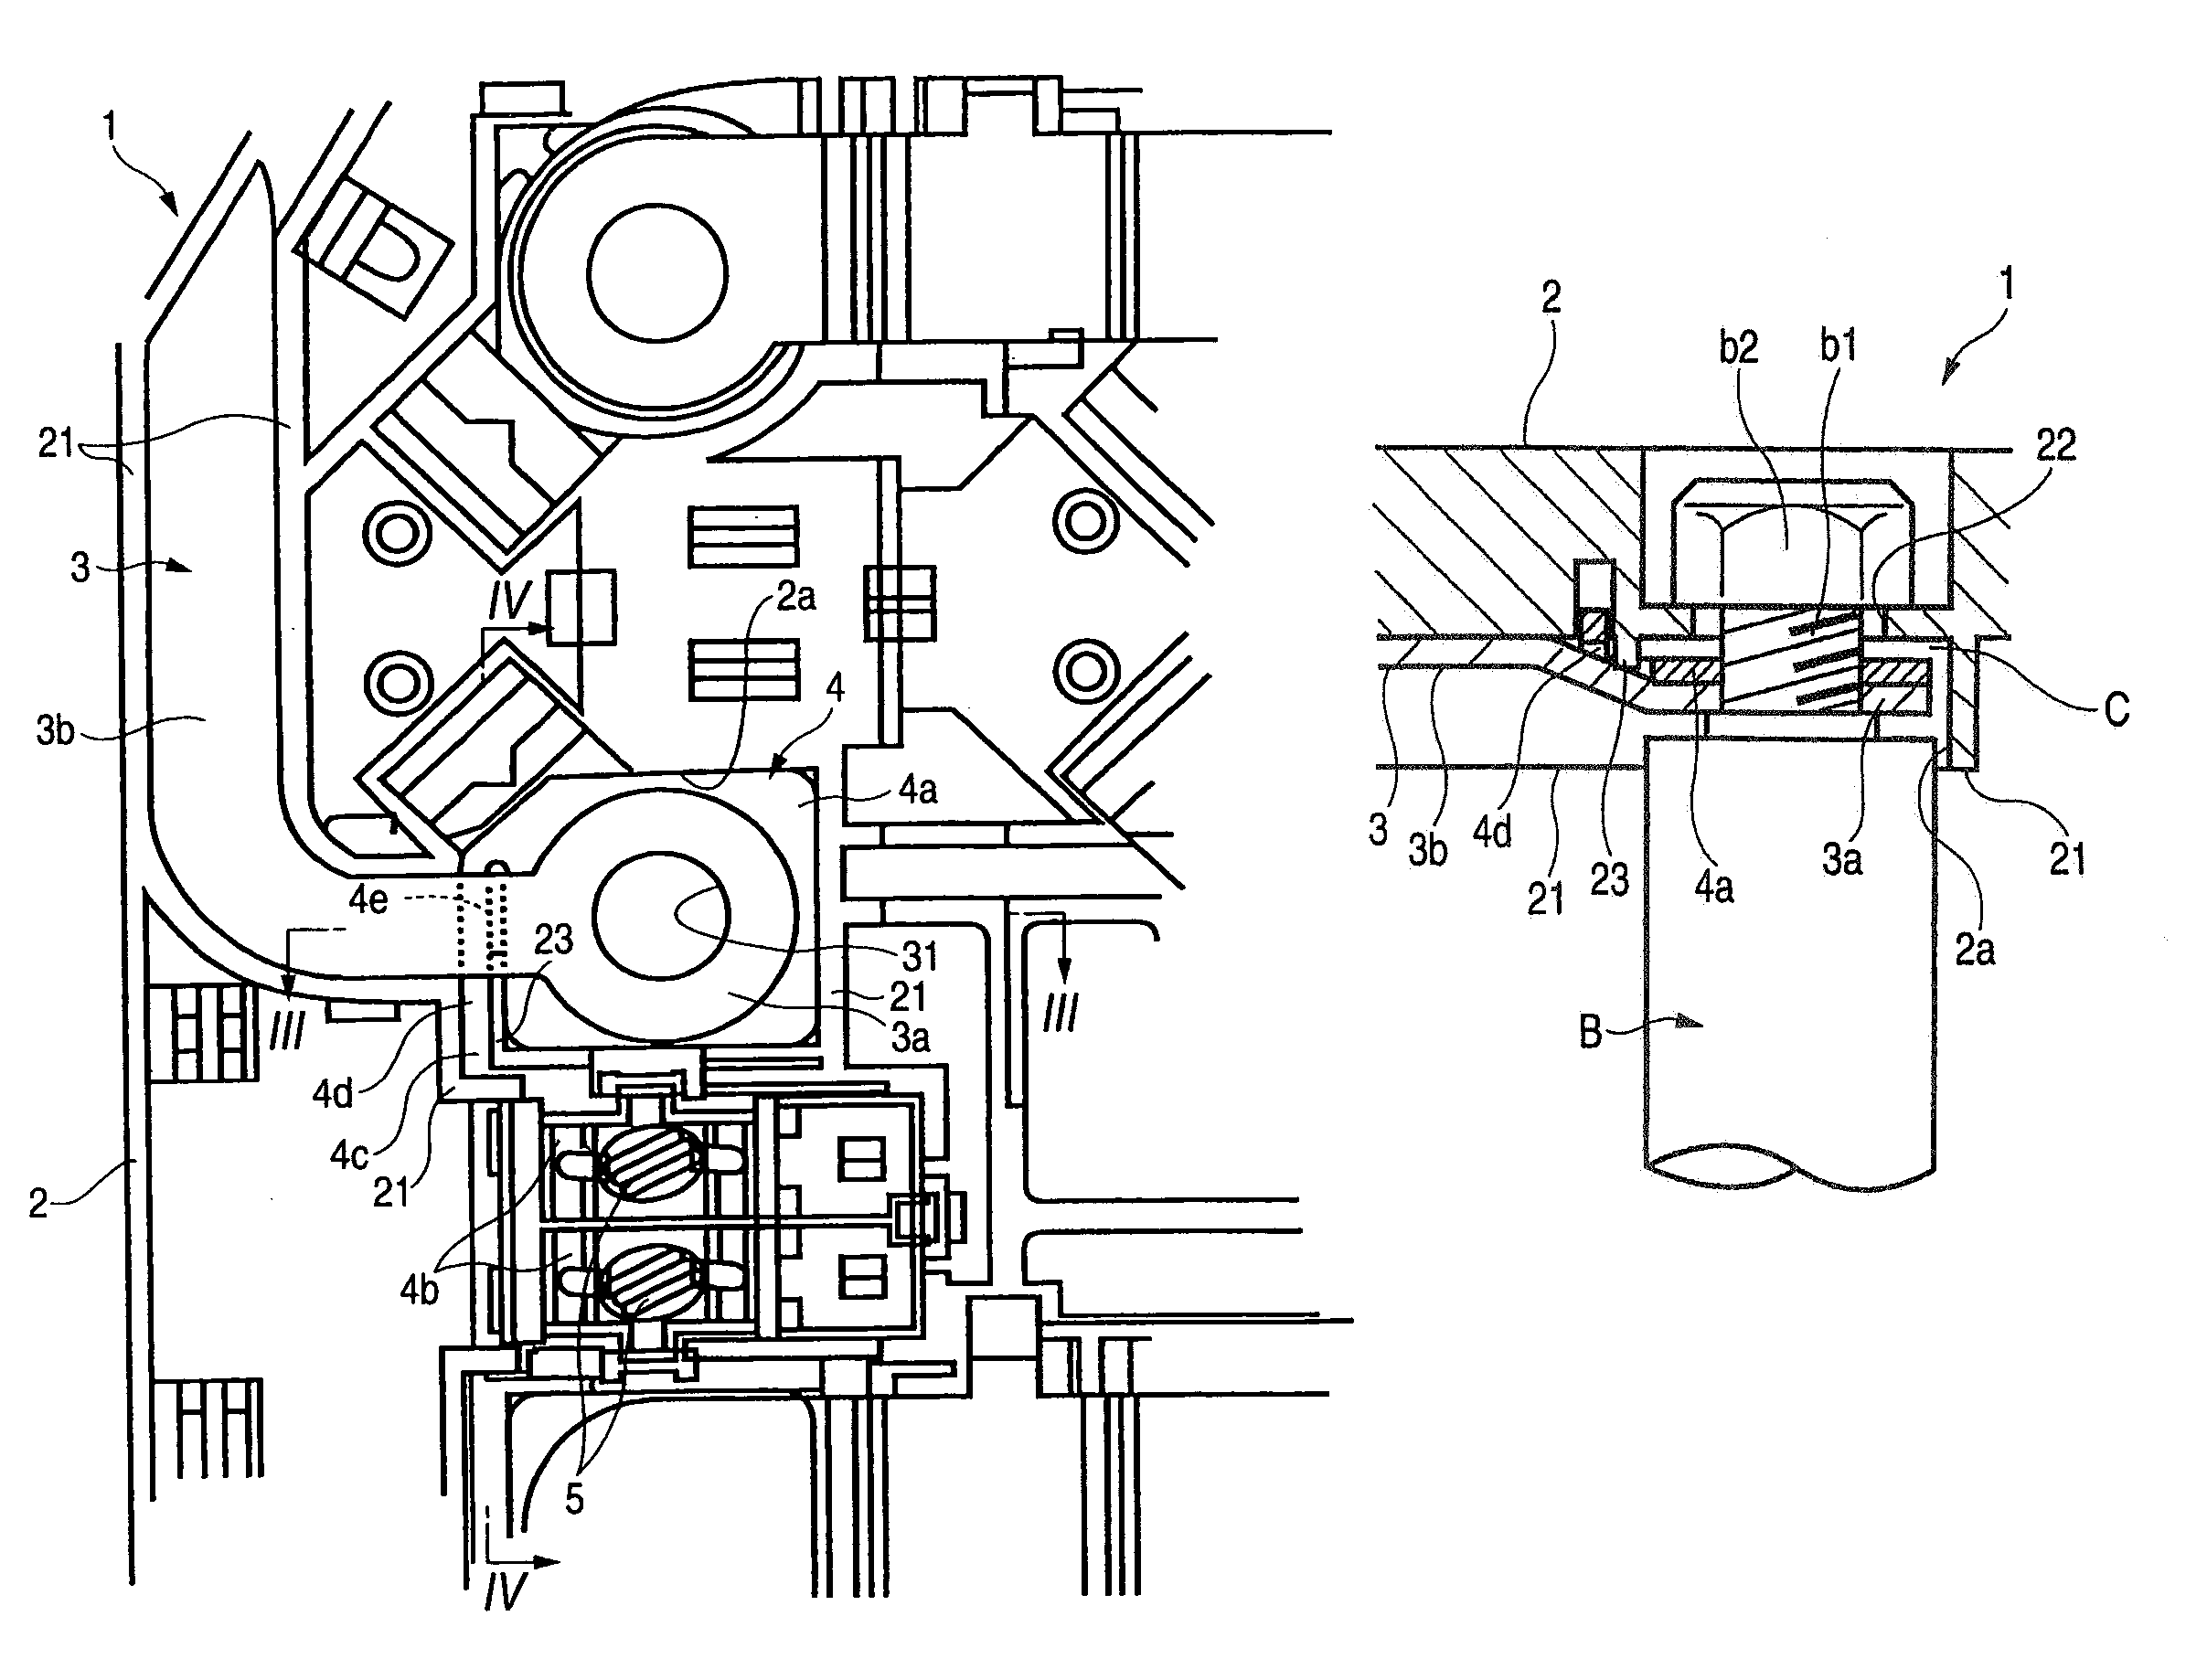 Battery connection plate with voltage detection element